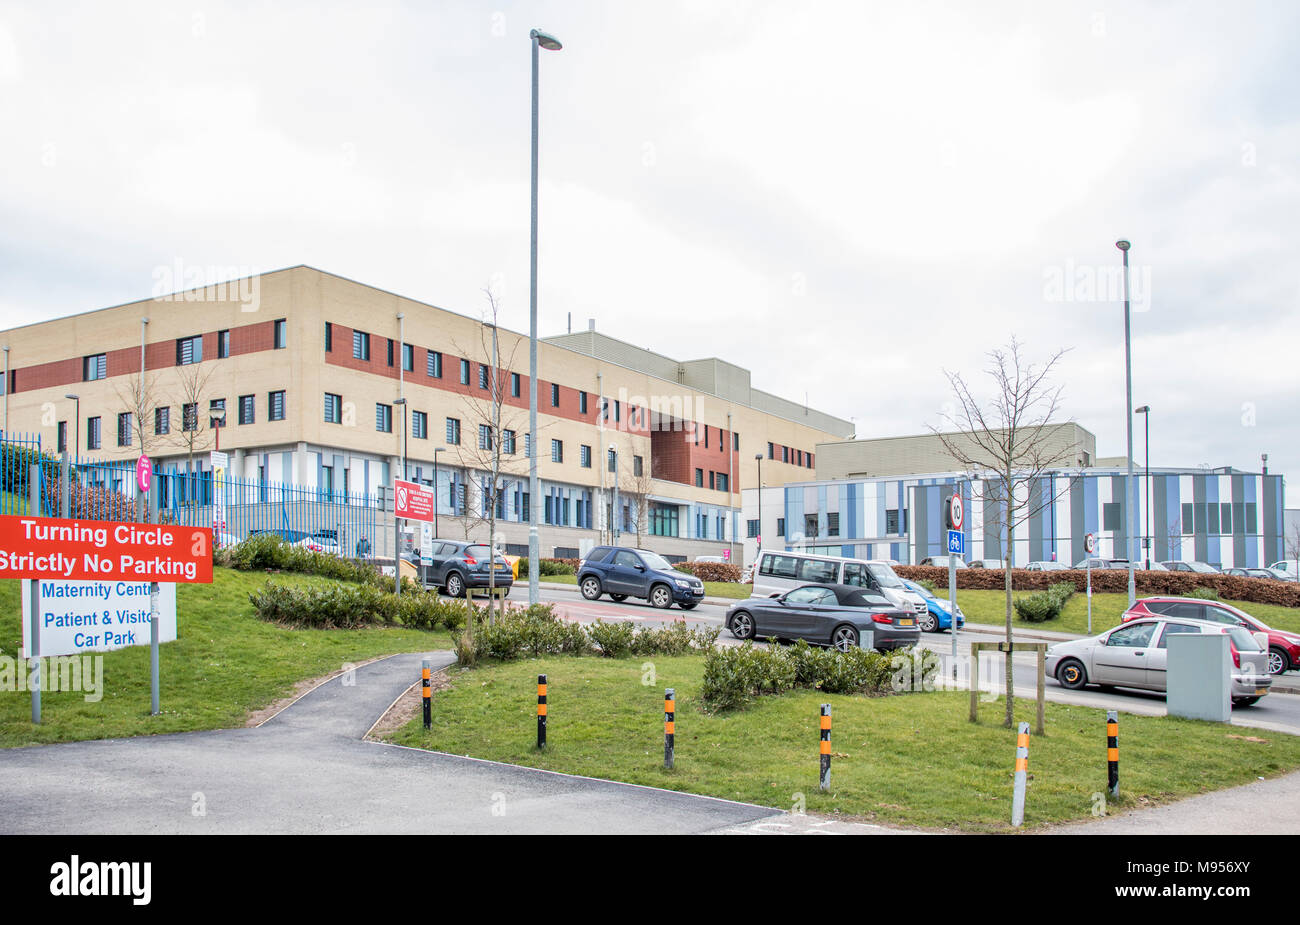 The Royal Stoke Hospital with maternity and oncology department buildings of the Universities of North Staffordshire Hospitals Trust at Stoke ob Trent Stock Photo